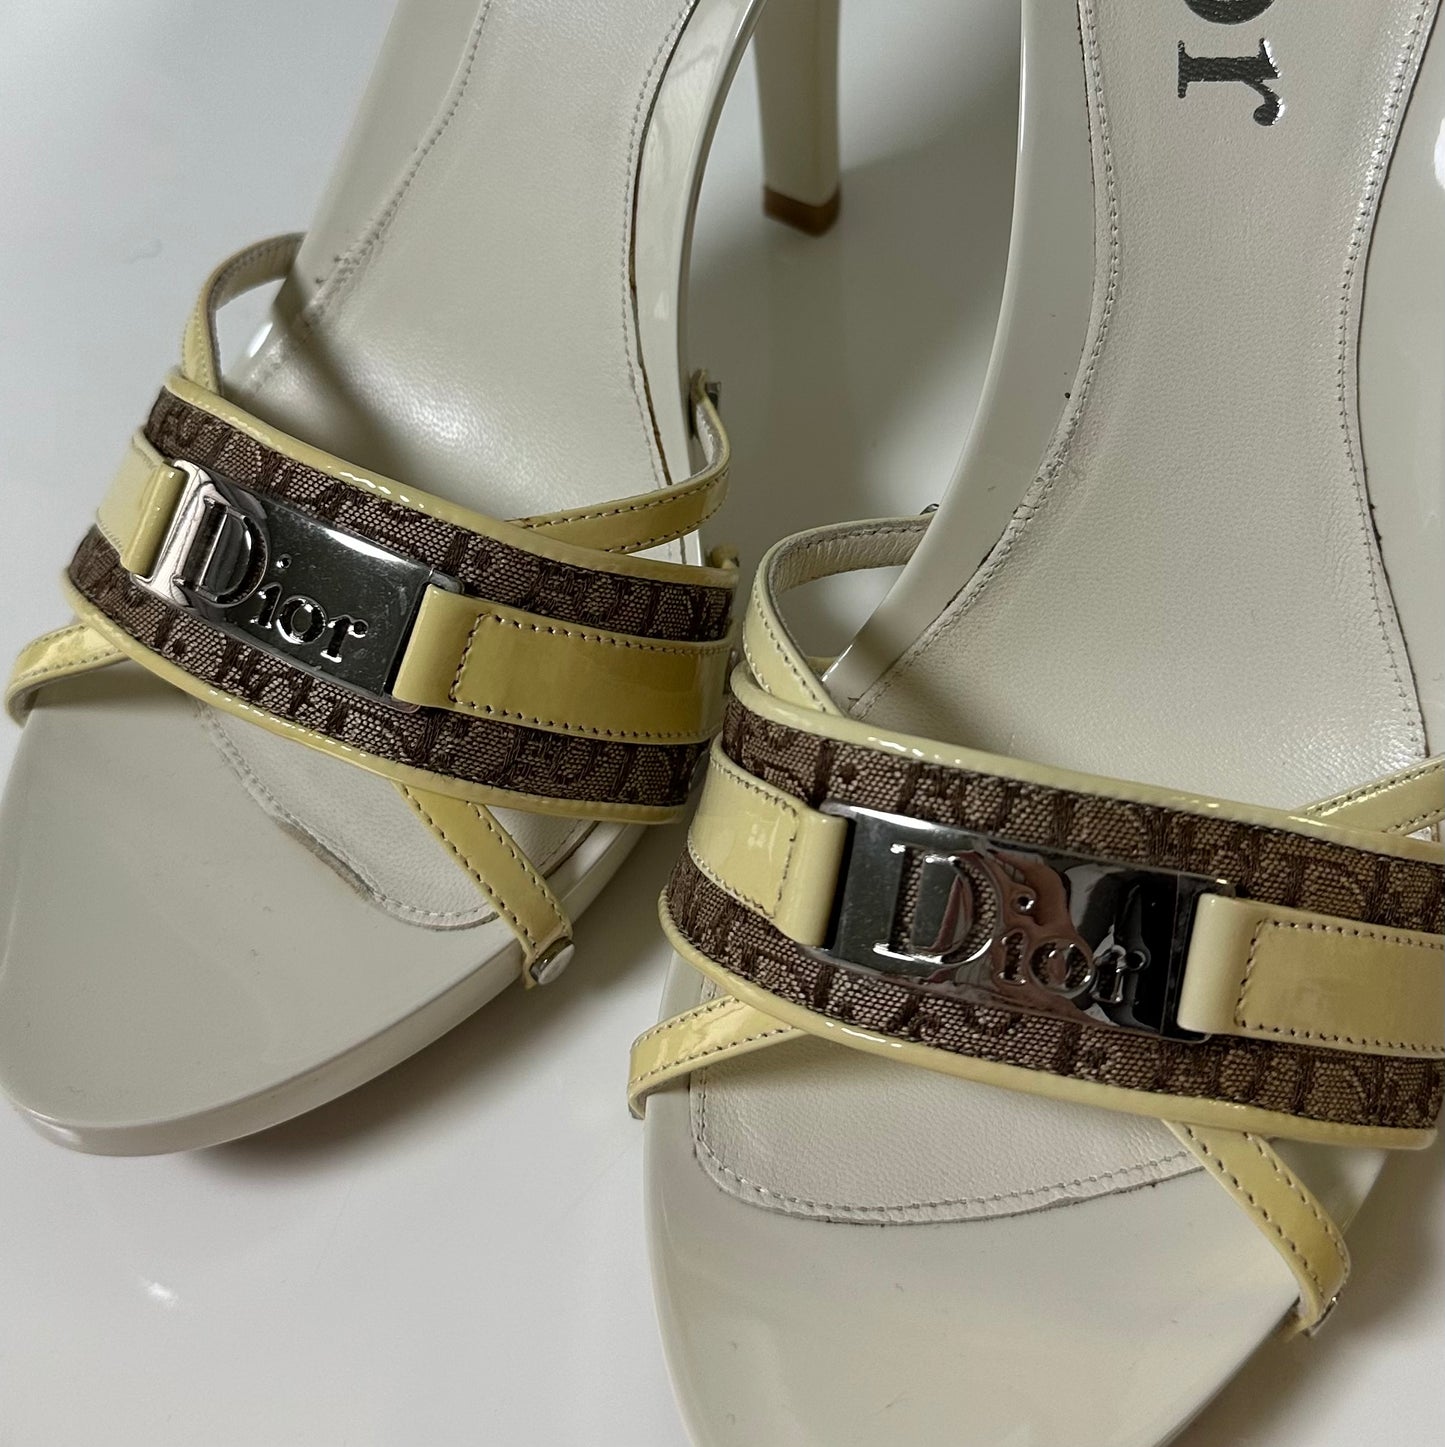 CHRISTIAN DIOR Spring Summer 2005 Diorissimo Street Chic Trotter Sandals